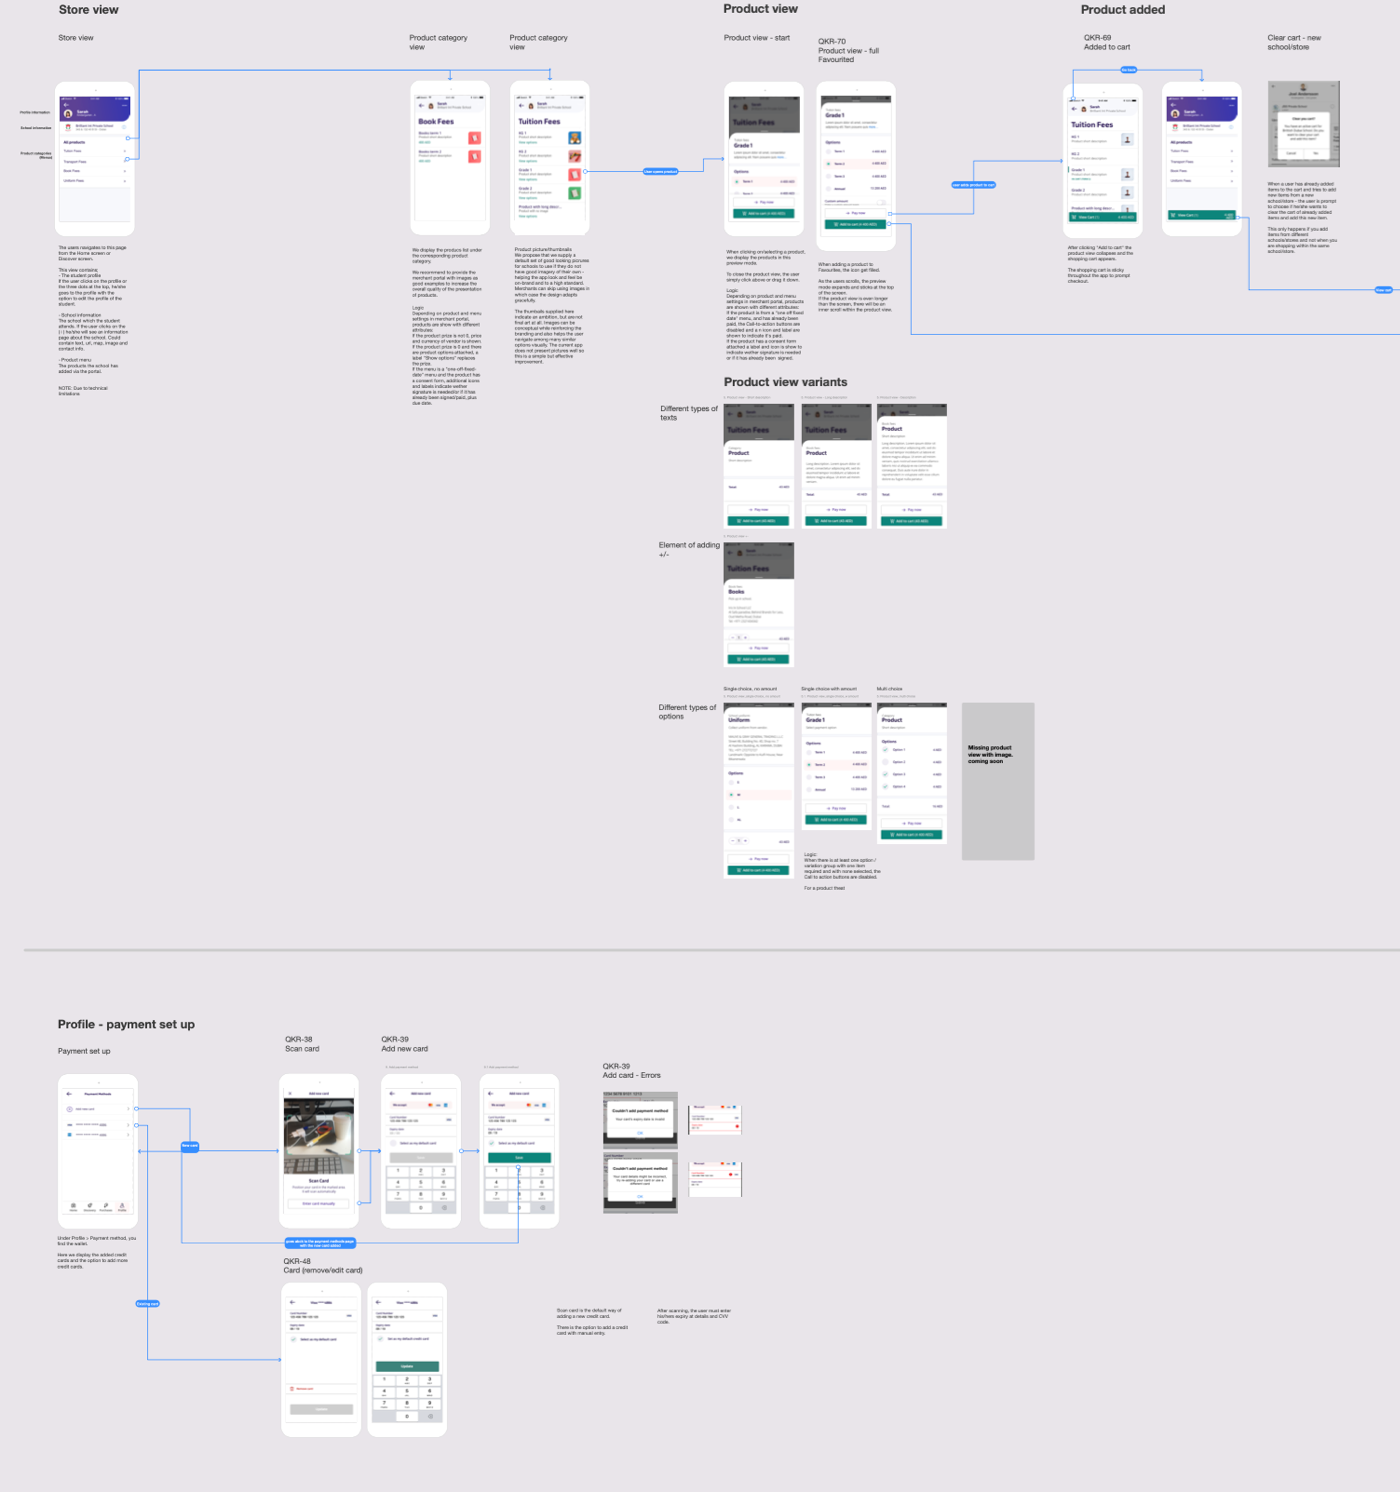 Once the strategy had been adopted,the end-user research had been conducted and concepts more shaped, the app started to get stitched together - as visualised here as a still from the Overflow application depicts